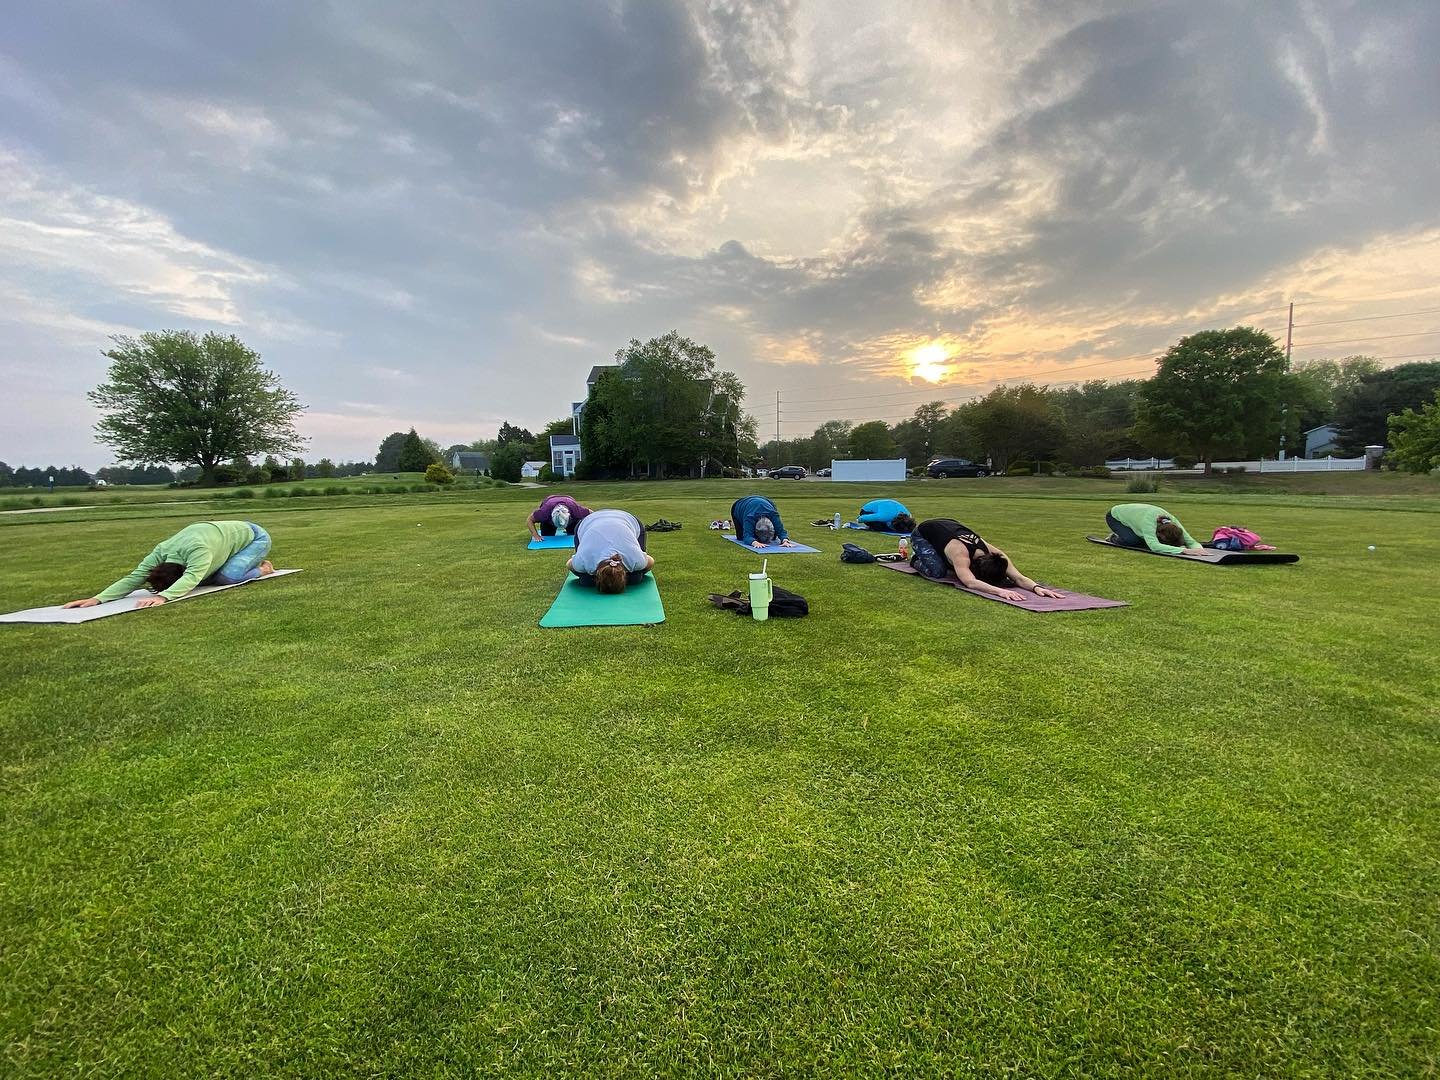 💭 Dreaming of outdoor yoga on this dreary day, can&rsquo;t wait to do it again Tuesday @ 6:30pm @americanclassicgolf 😎 #yoga #outdooryoga #yogaonthefairway #acgc #bmf #balanced